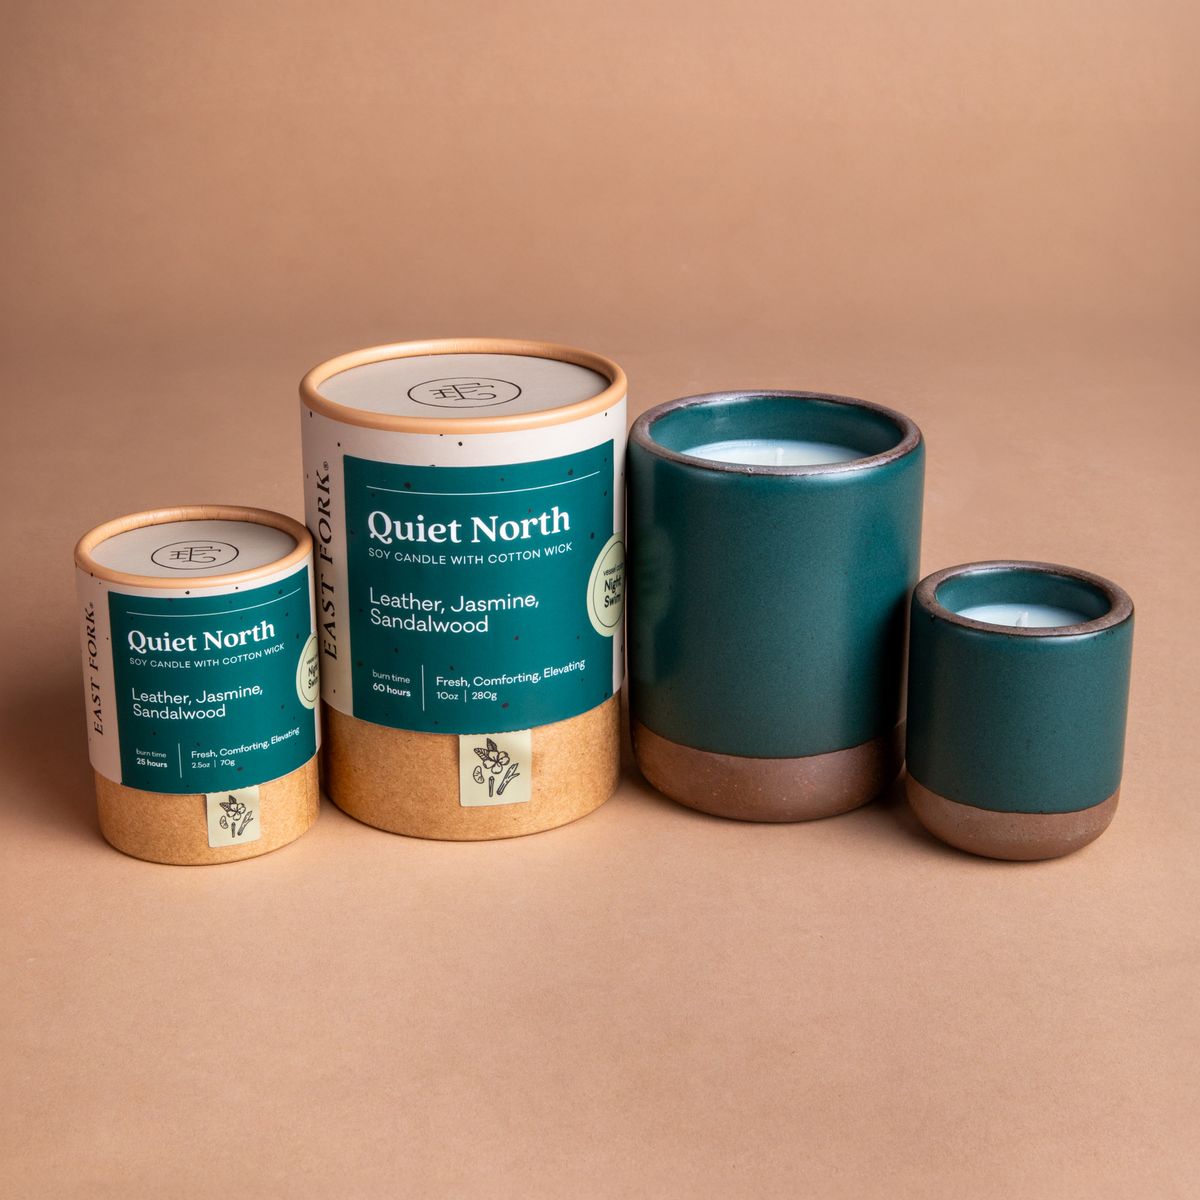 Small and large ceramic vessel next to each other in a dark teal color with candles inside each. Cardboard tube packaging is on the left with branding stickers that say "Quiet North".